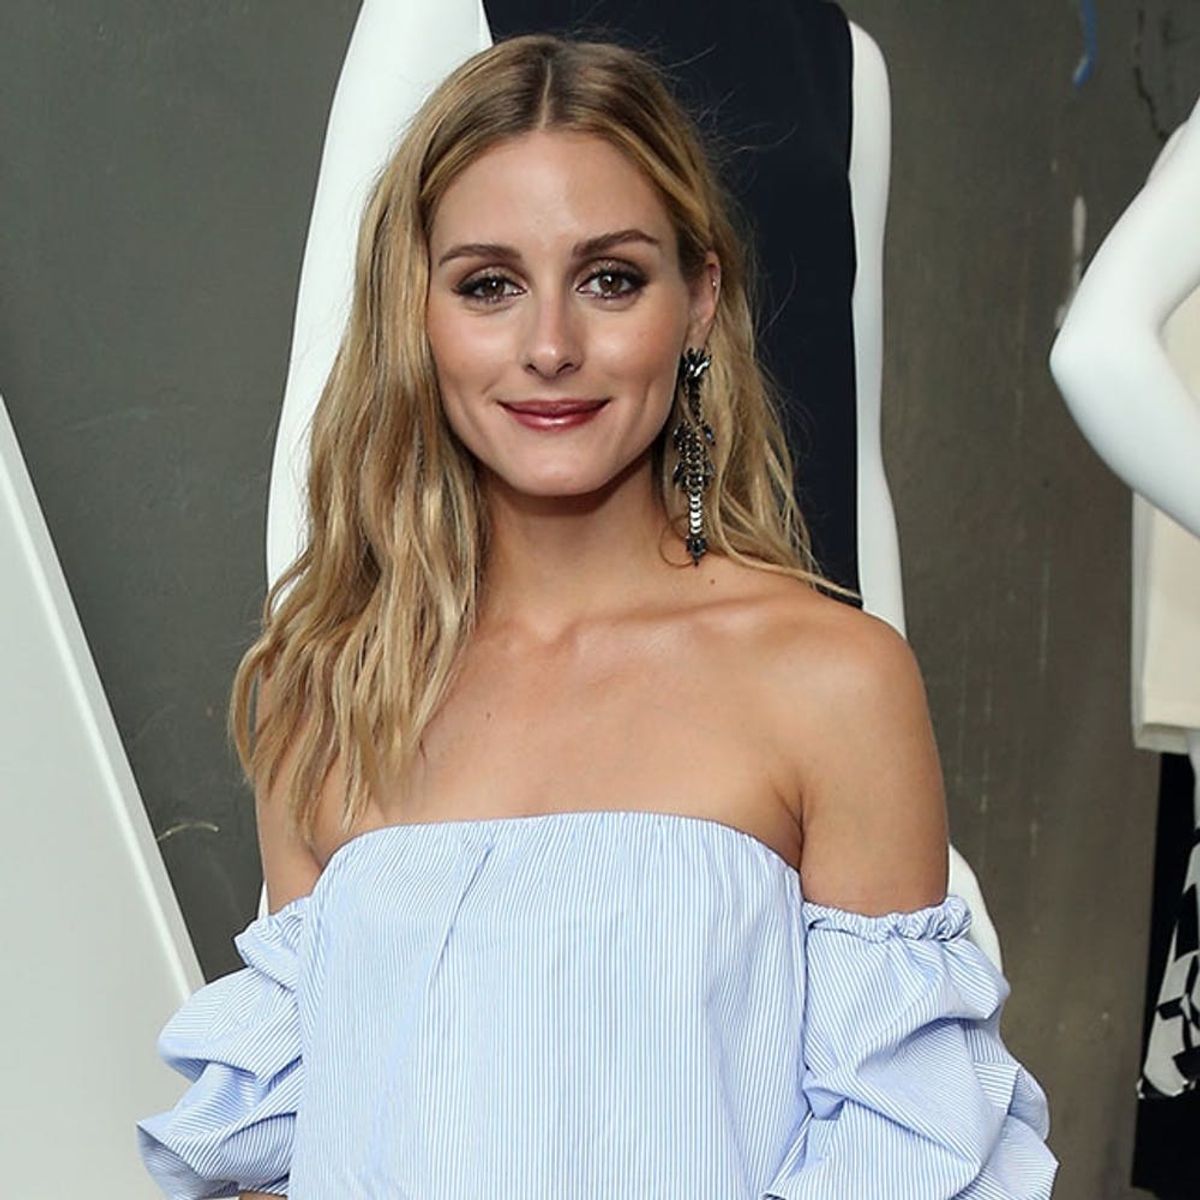 Olivia Palermo’s Skinny Scarf Is a Chic AF Summer Trend